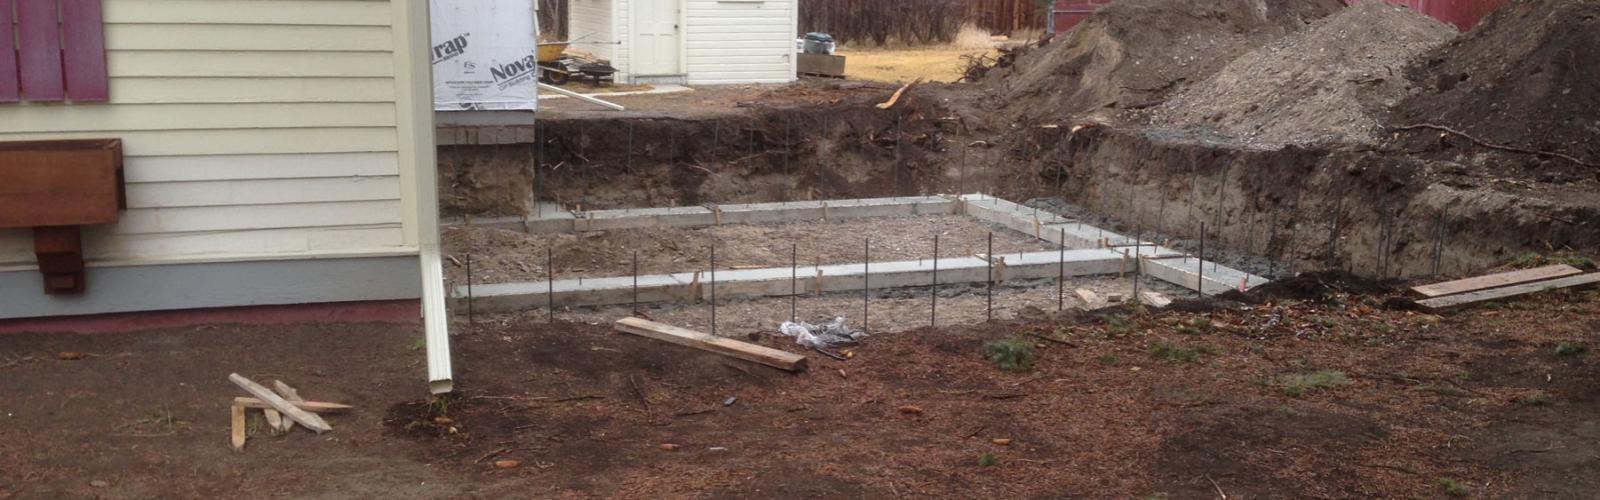 concrete footings with rebar